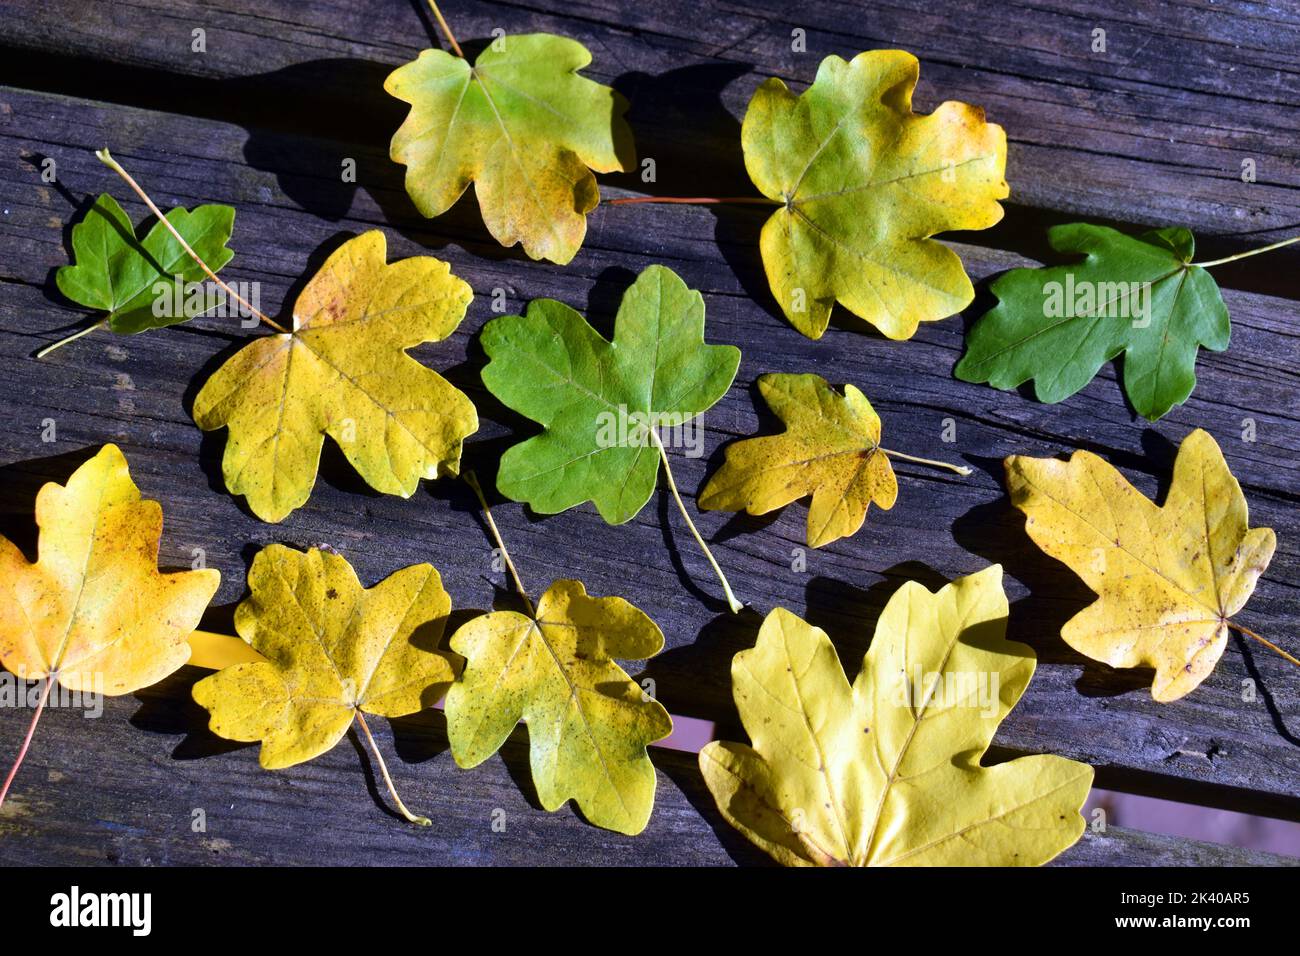 Leaves of the country maple (Acer campestre) with autumn colors on a wooden table Stock Photo